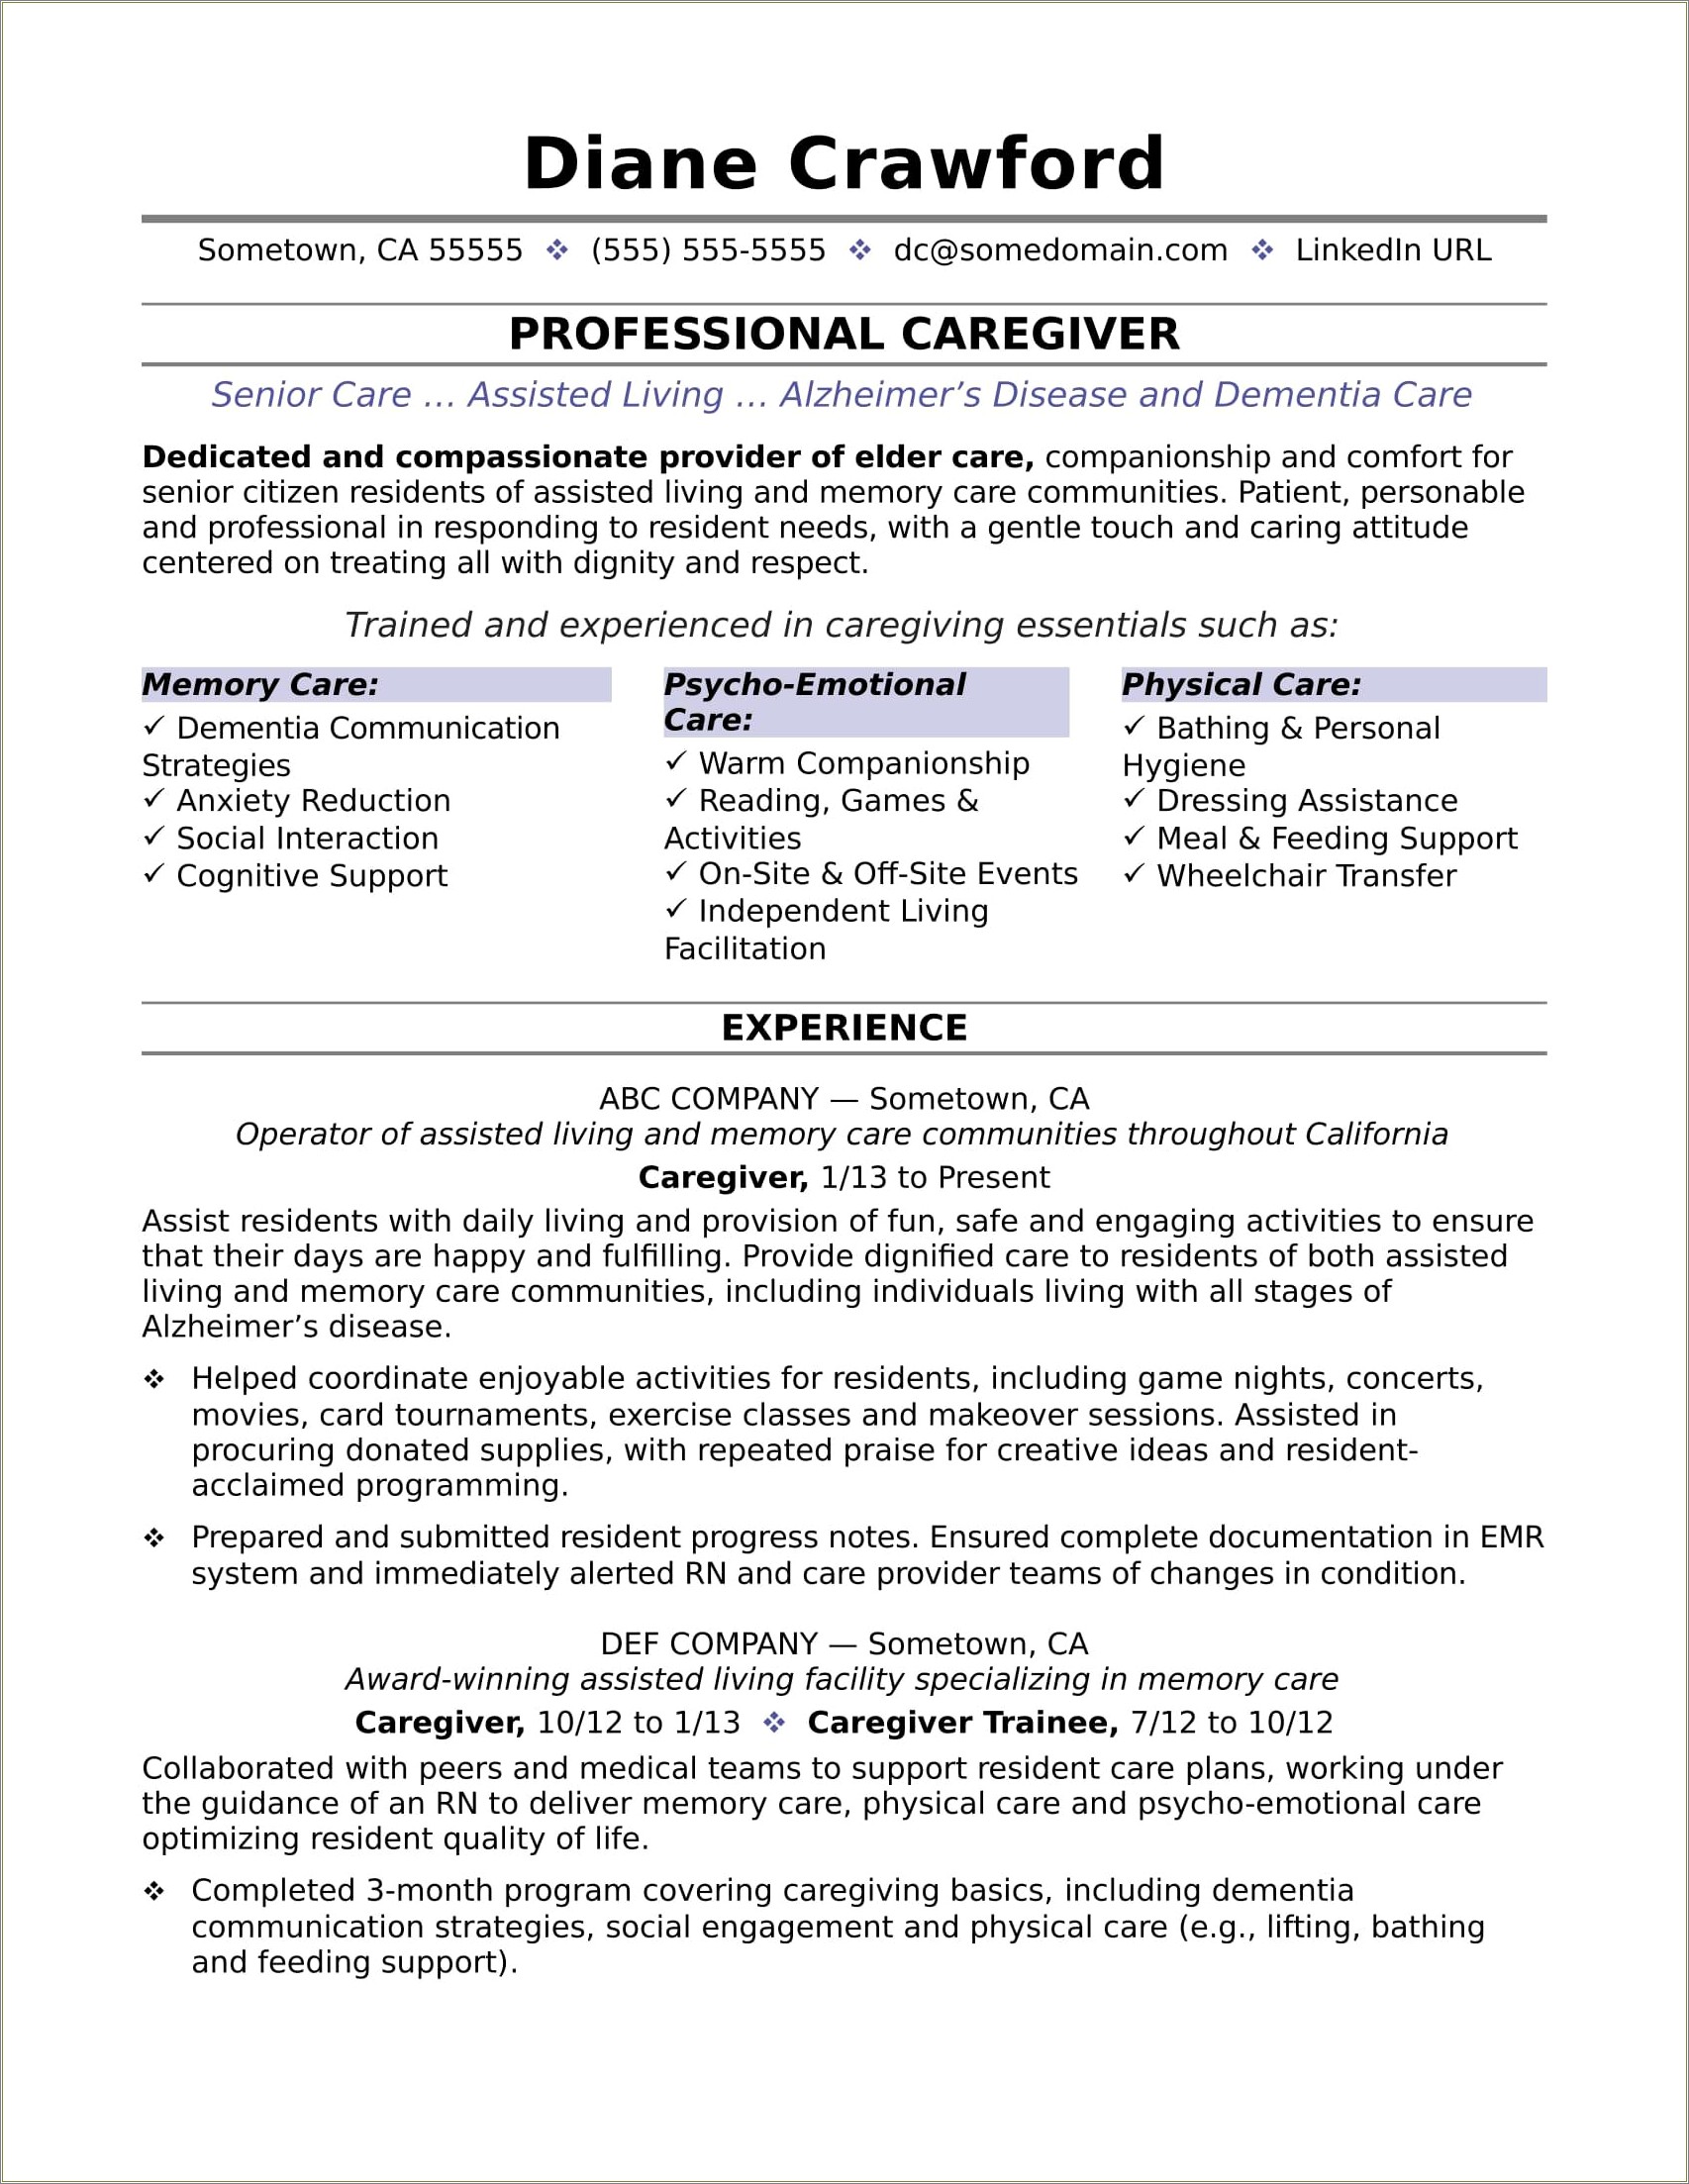 Resume Template For Nearly Retired Person